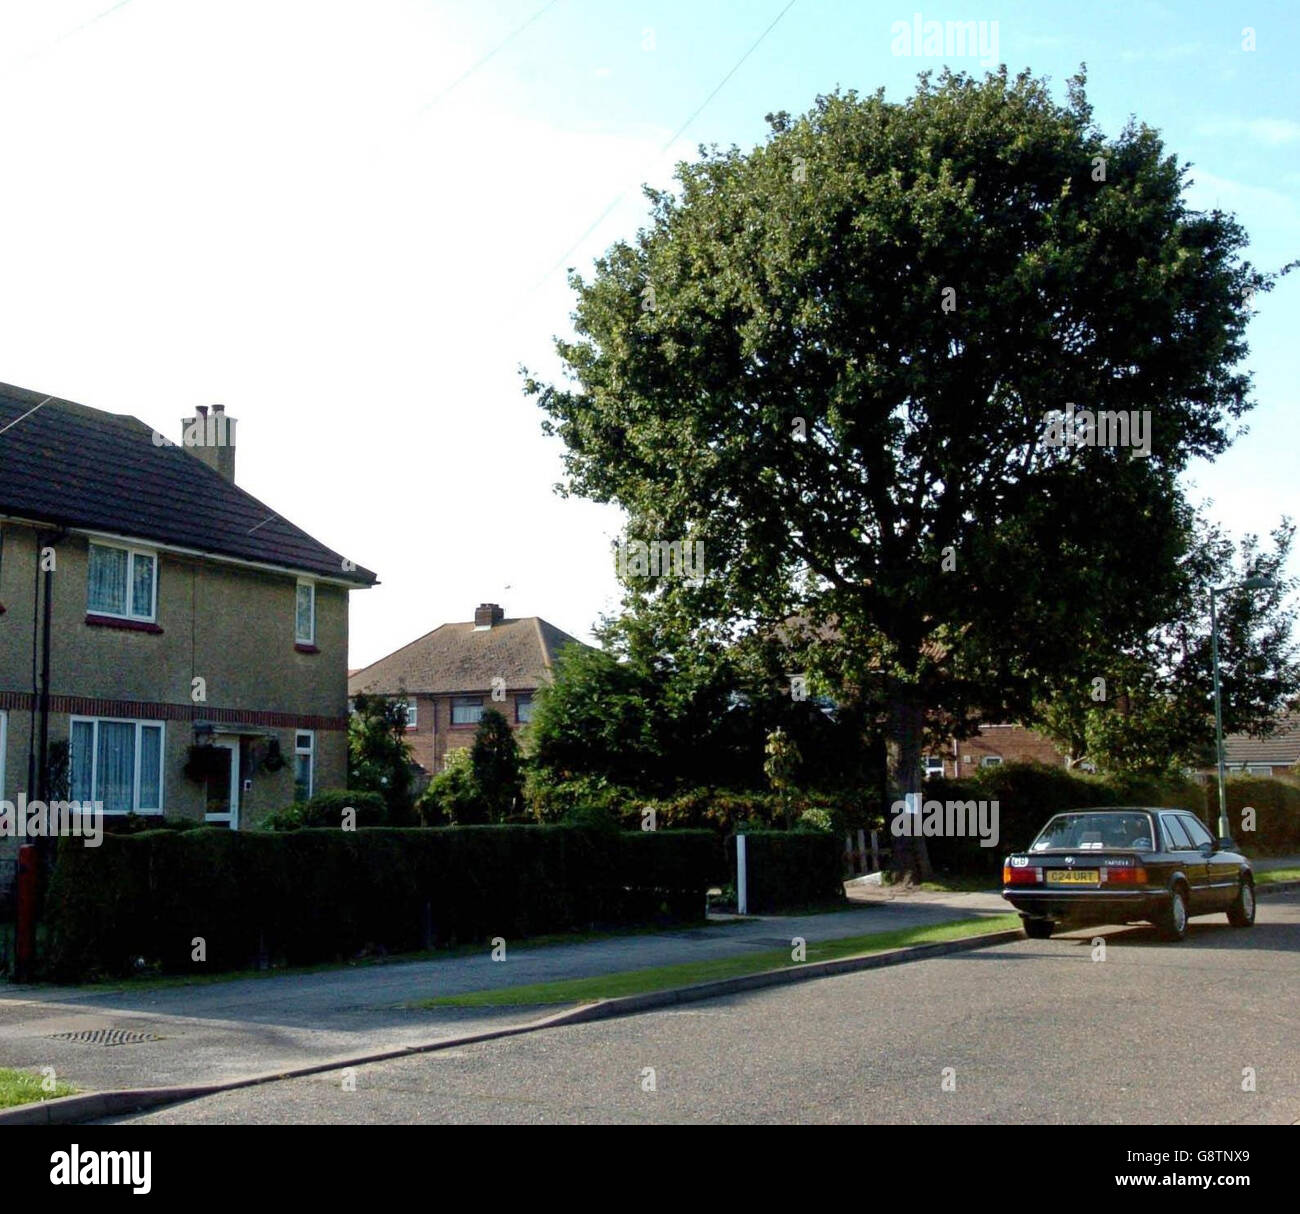 The home (left) of Arthur Burgess, 80, in Trimley St Martin, Ipswich, who was convicted at Ipswich Magistrates Court Wednesday September 21 2005, of assaulting police, harassment and criminal damage. The 80-year-old Second World War veteran who 'got a bee in his bonnet' about an oak tree overhanging his garden has been remanded in custody for three weeks pending sentencing. See PA story COURTS Veteran. PRESS ASSOCIATION Photo. Photo credit should read: Chris Radburn / PA. Stock Photo